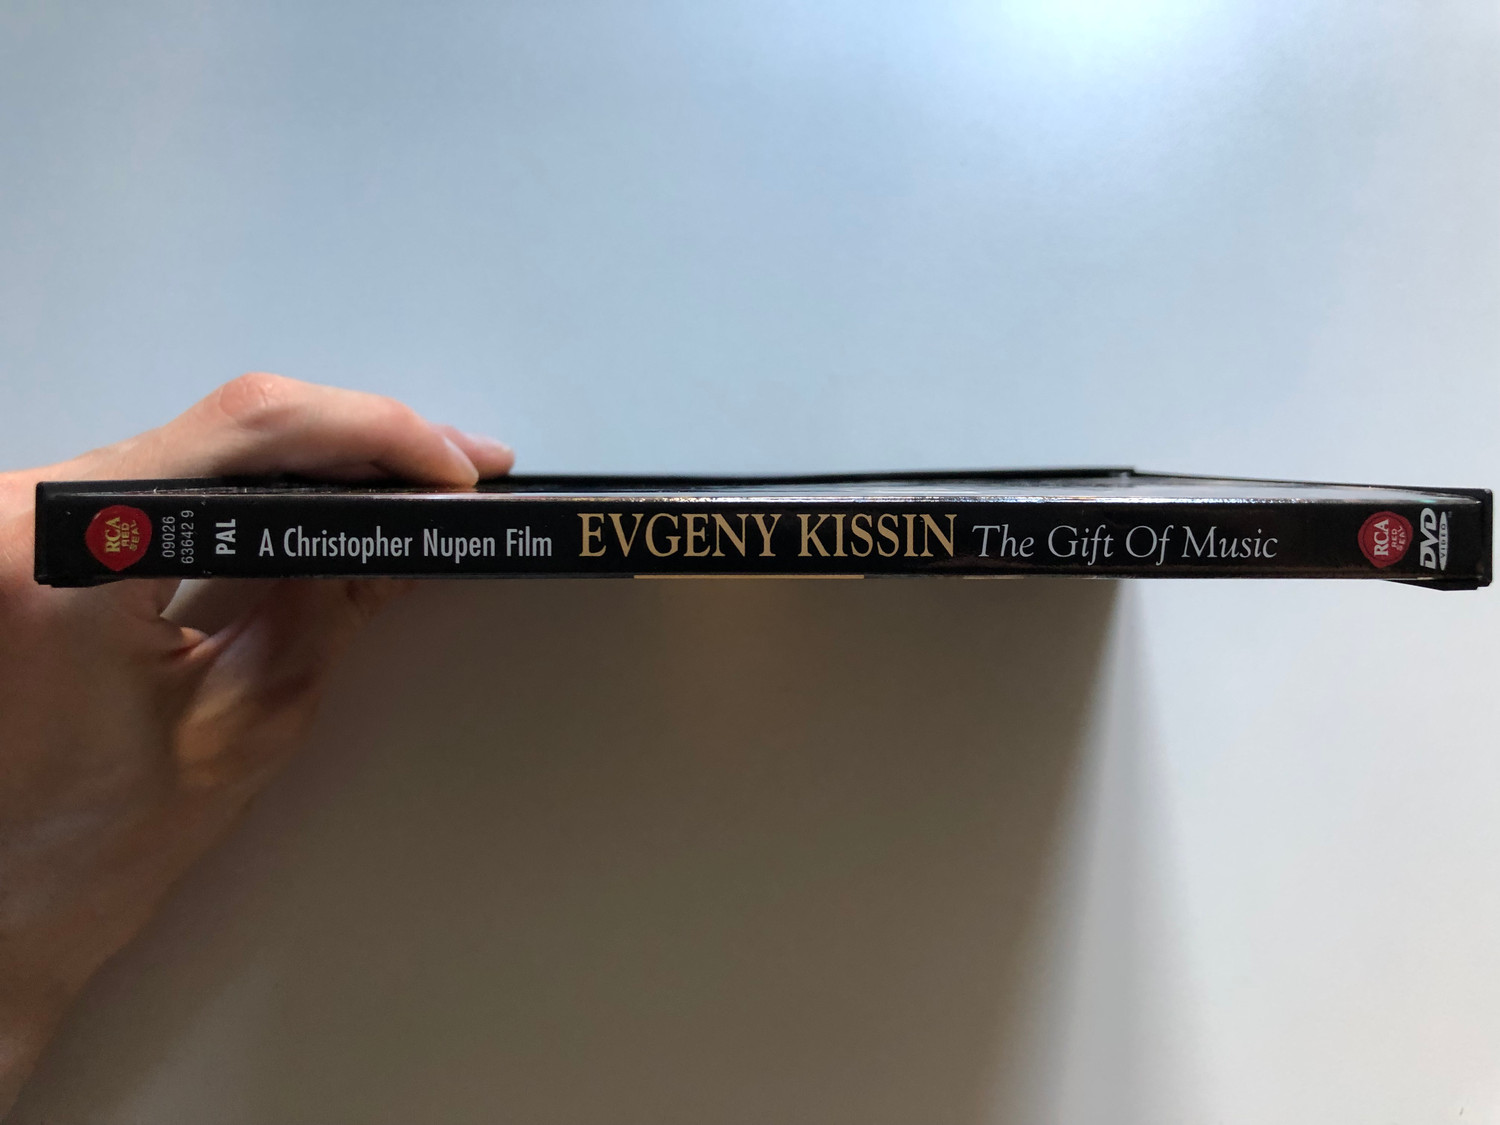 Evgeny Kissin: The Gift Of Music DVD Video